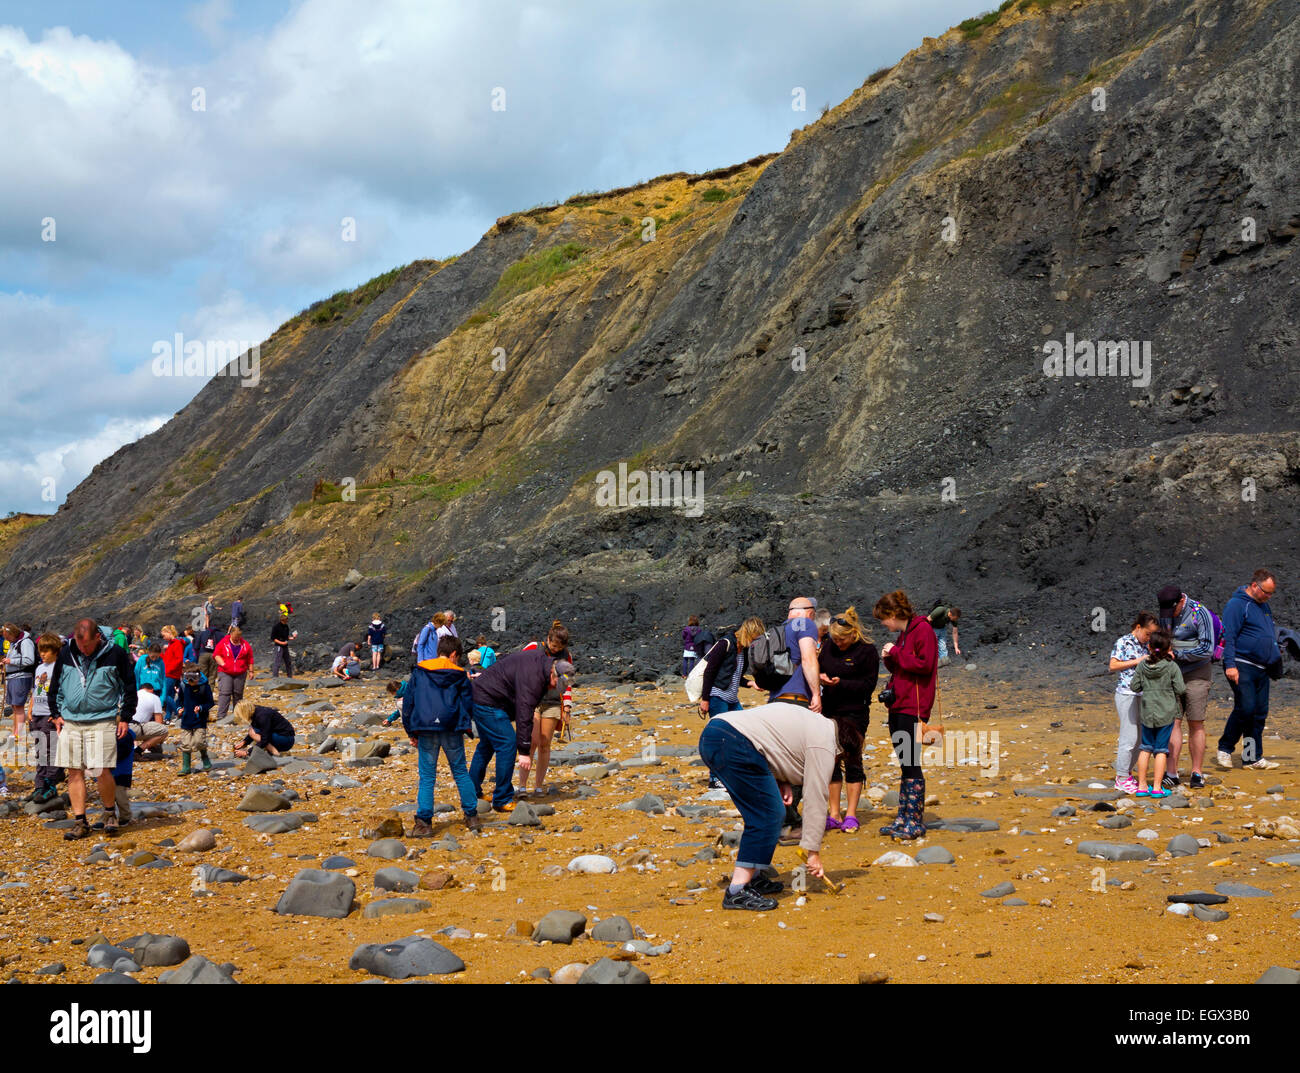 People hunting for fossils on the beach below the crumbling cliffs at Charmouth on the Jurassic Coast in West Dorset England UK Stock Photo